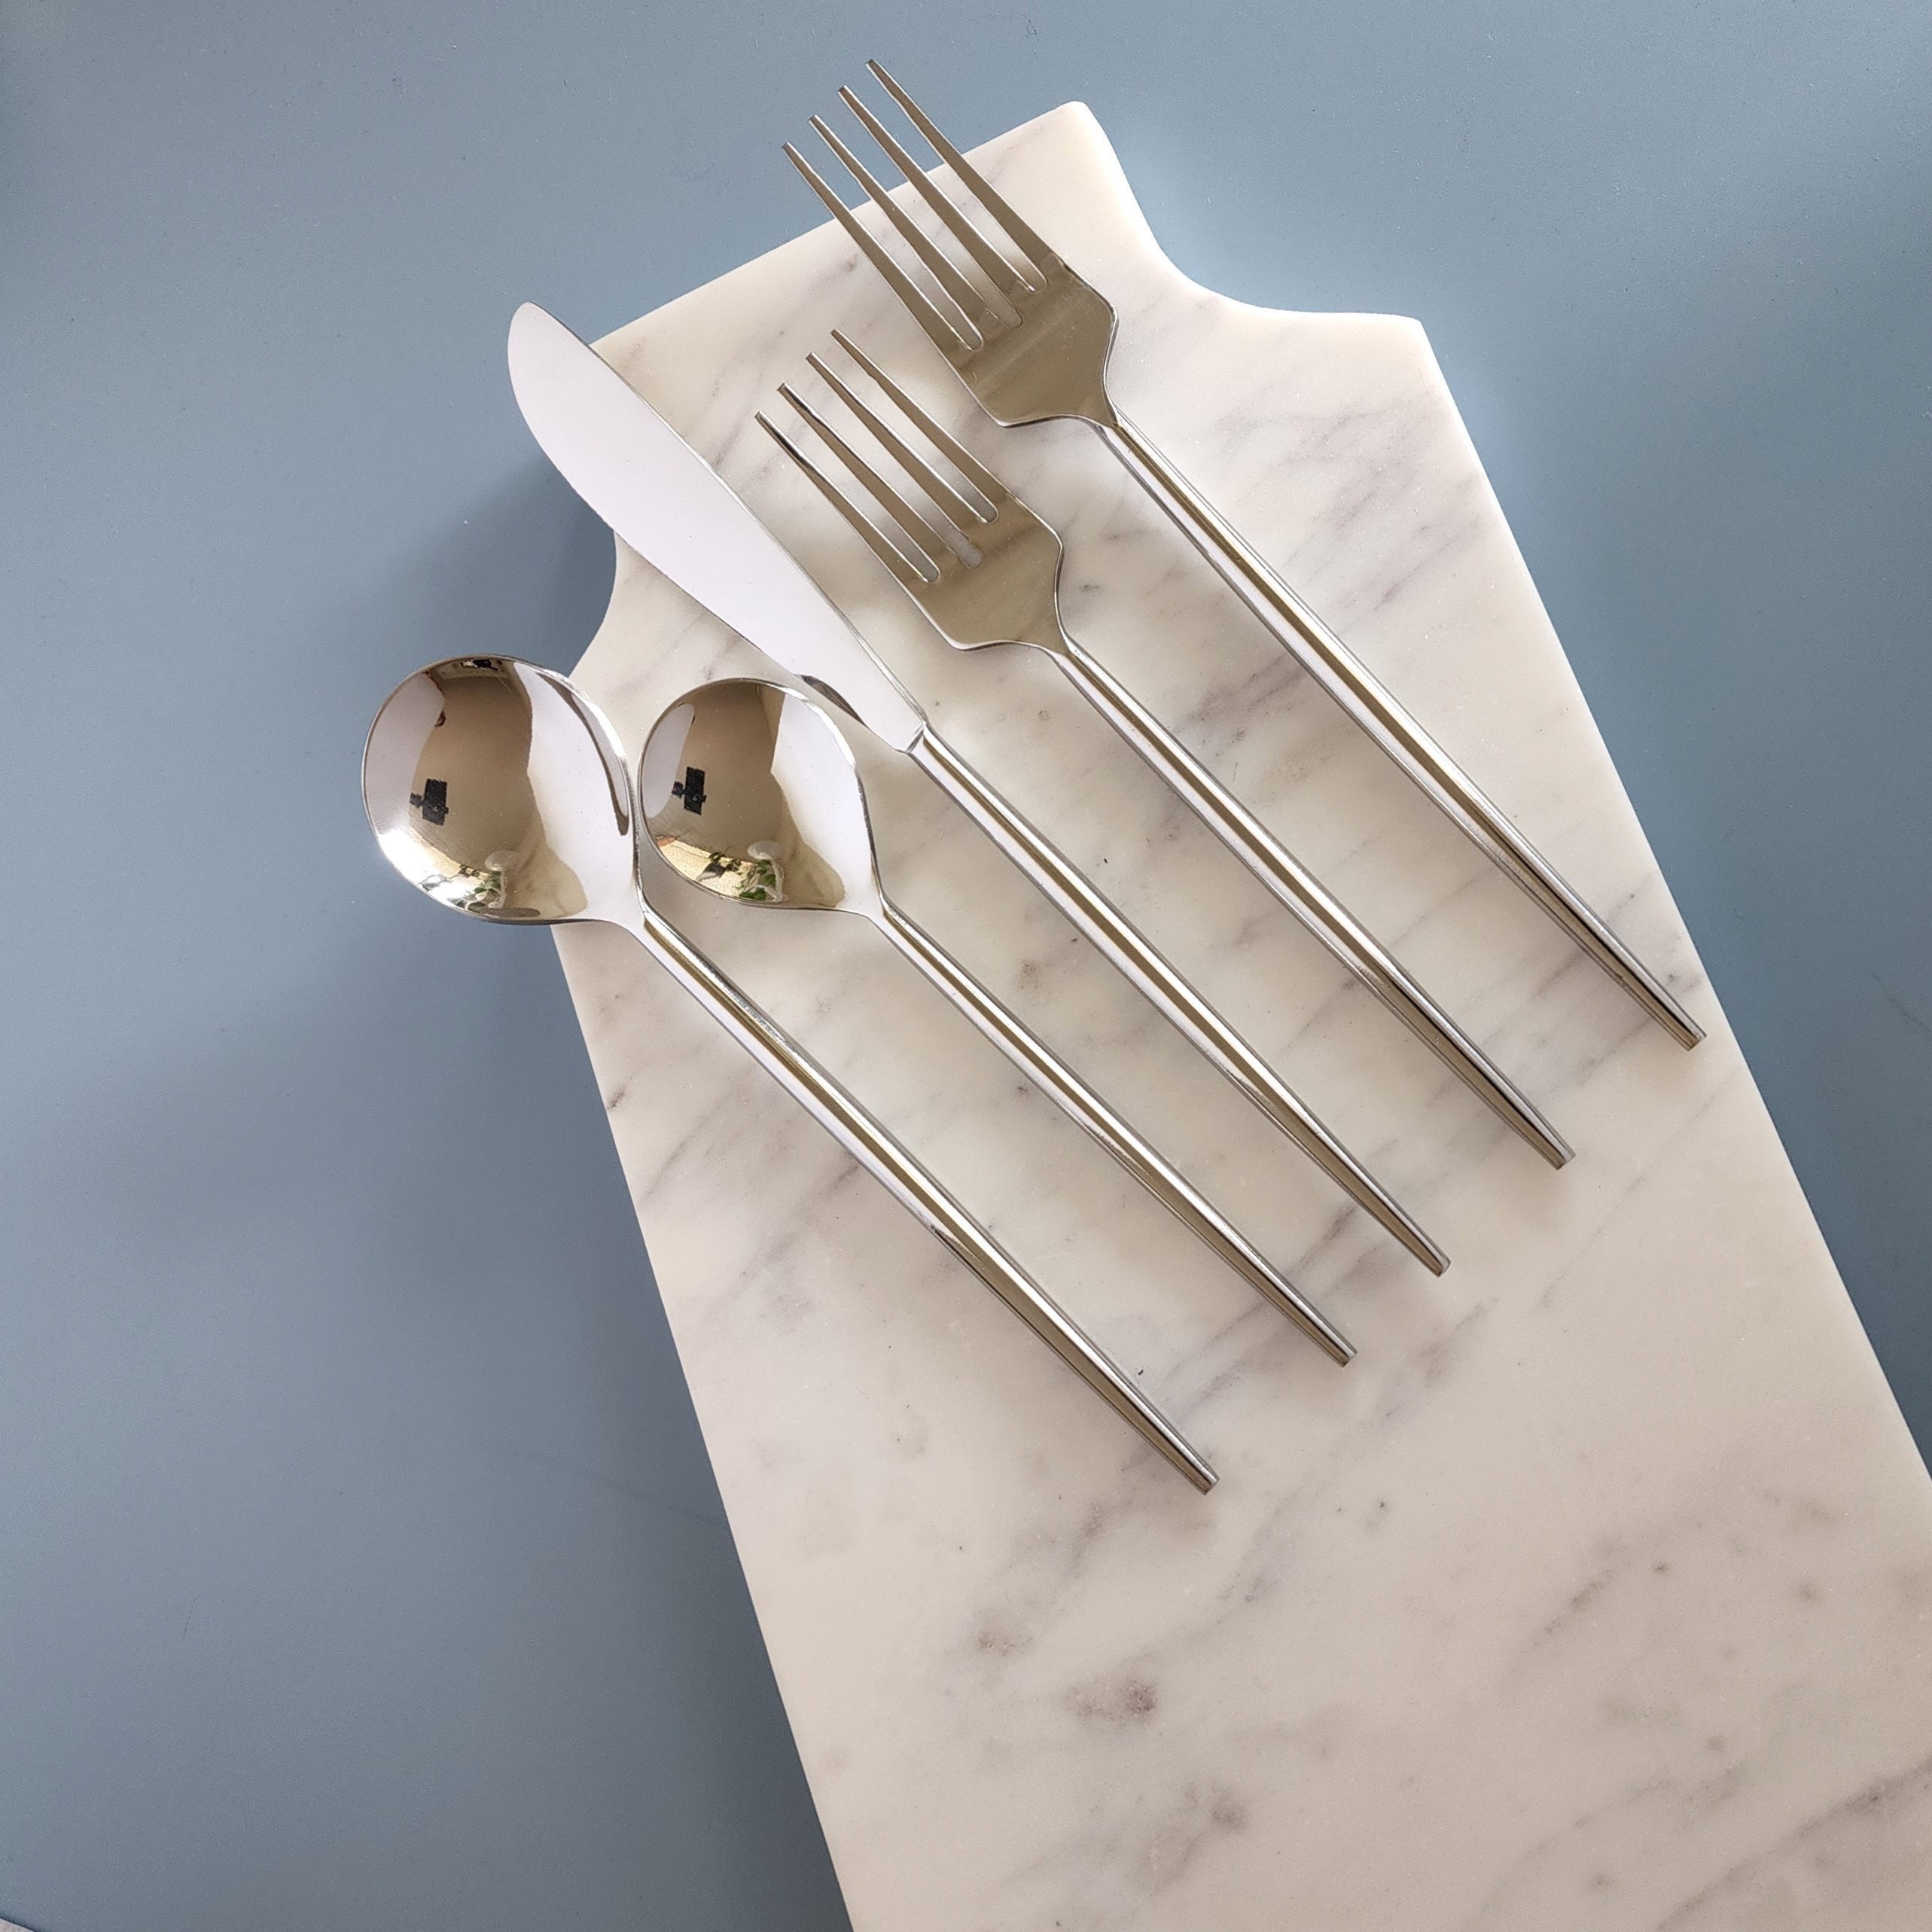 Hand Finished Minimalist Cutlery Set 5 to 30 Piece Stainless